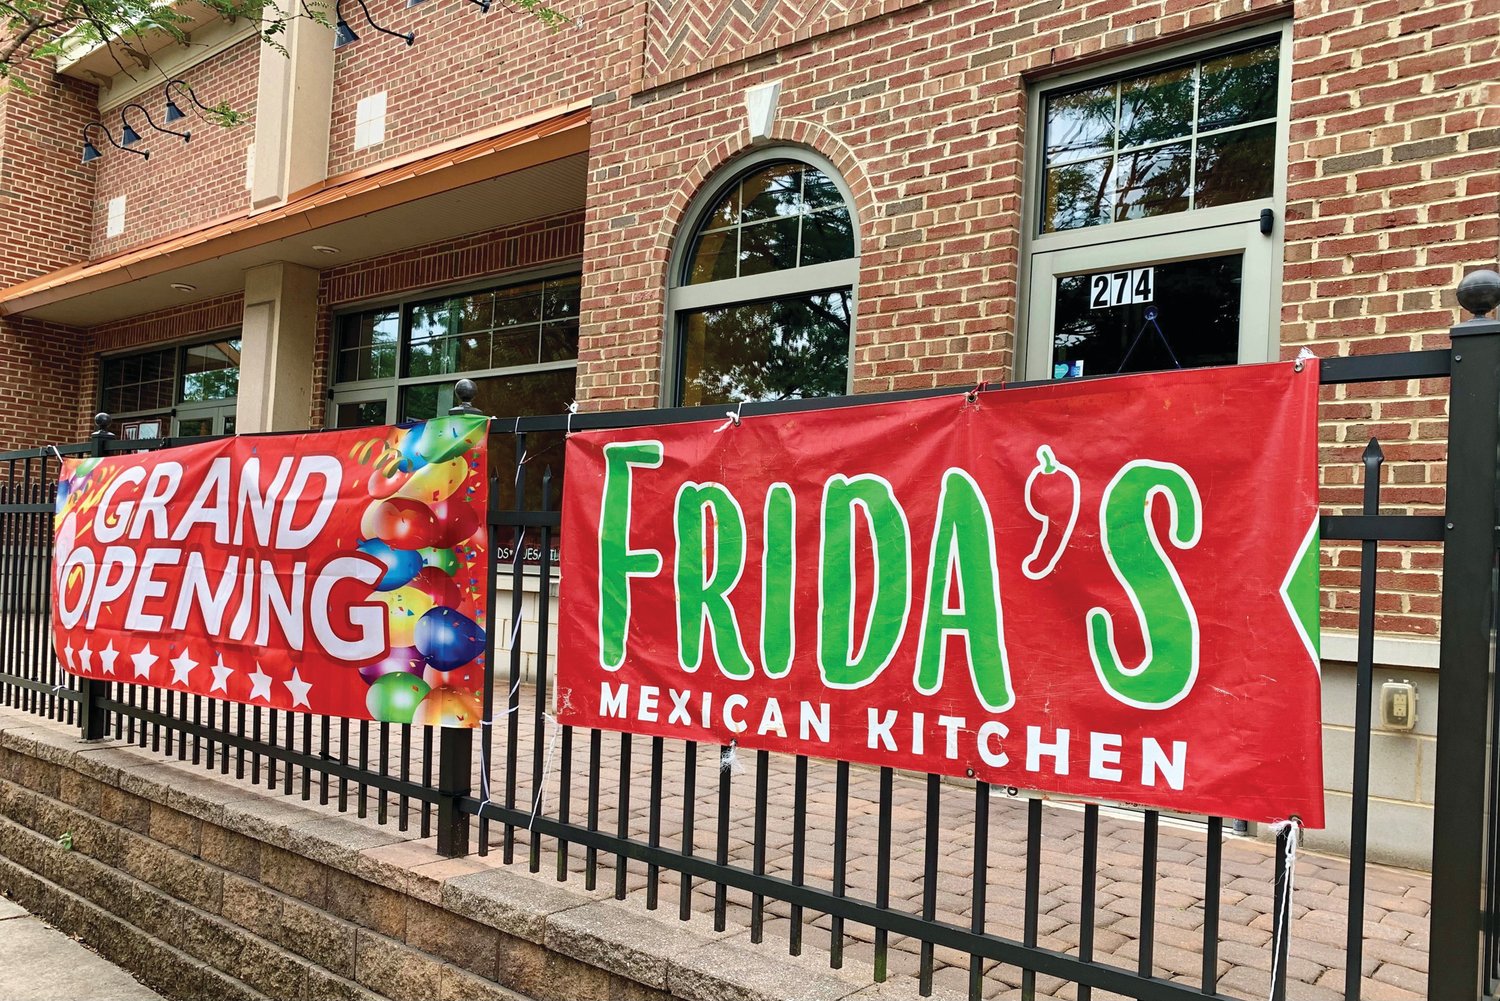 New Mexican restaurant Las Frida’s Mexican Kitchen opens in Doylestown